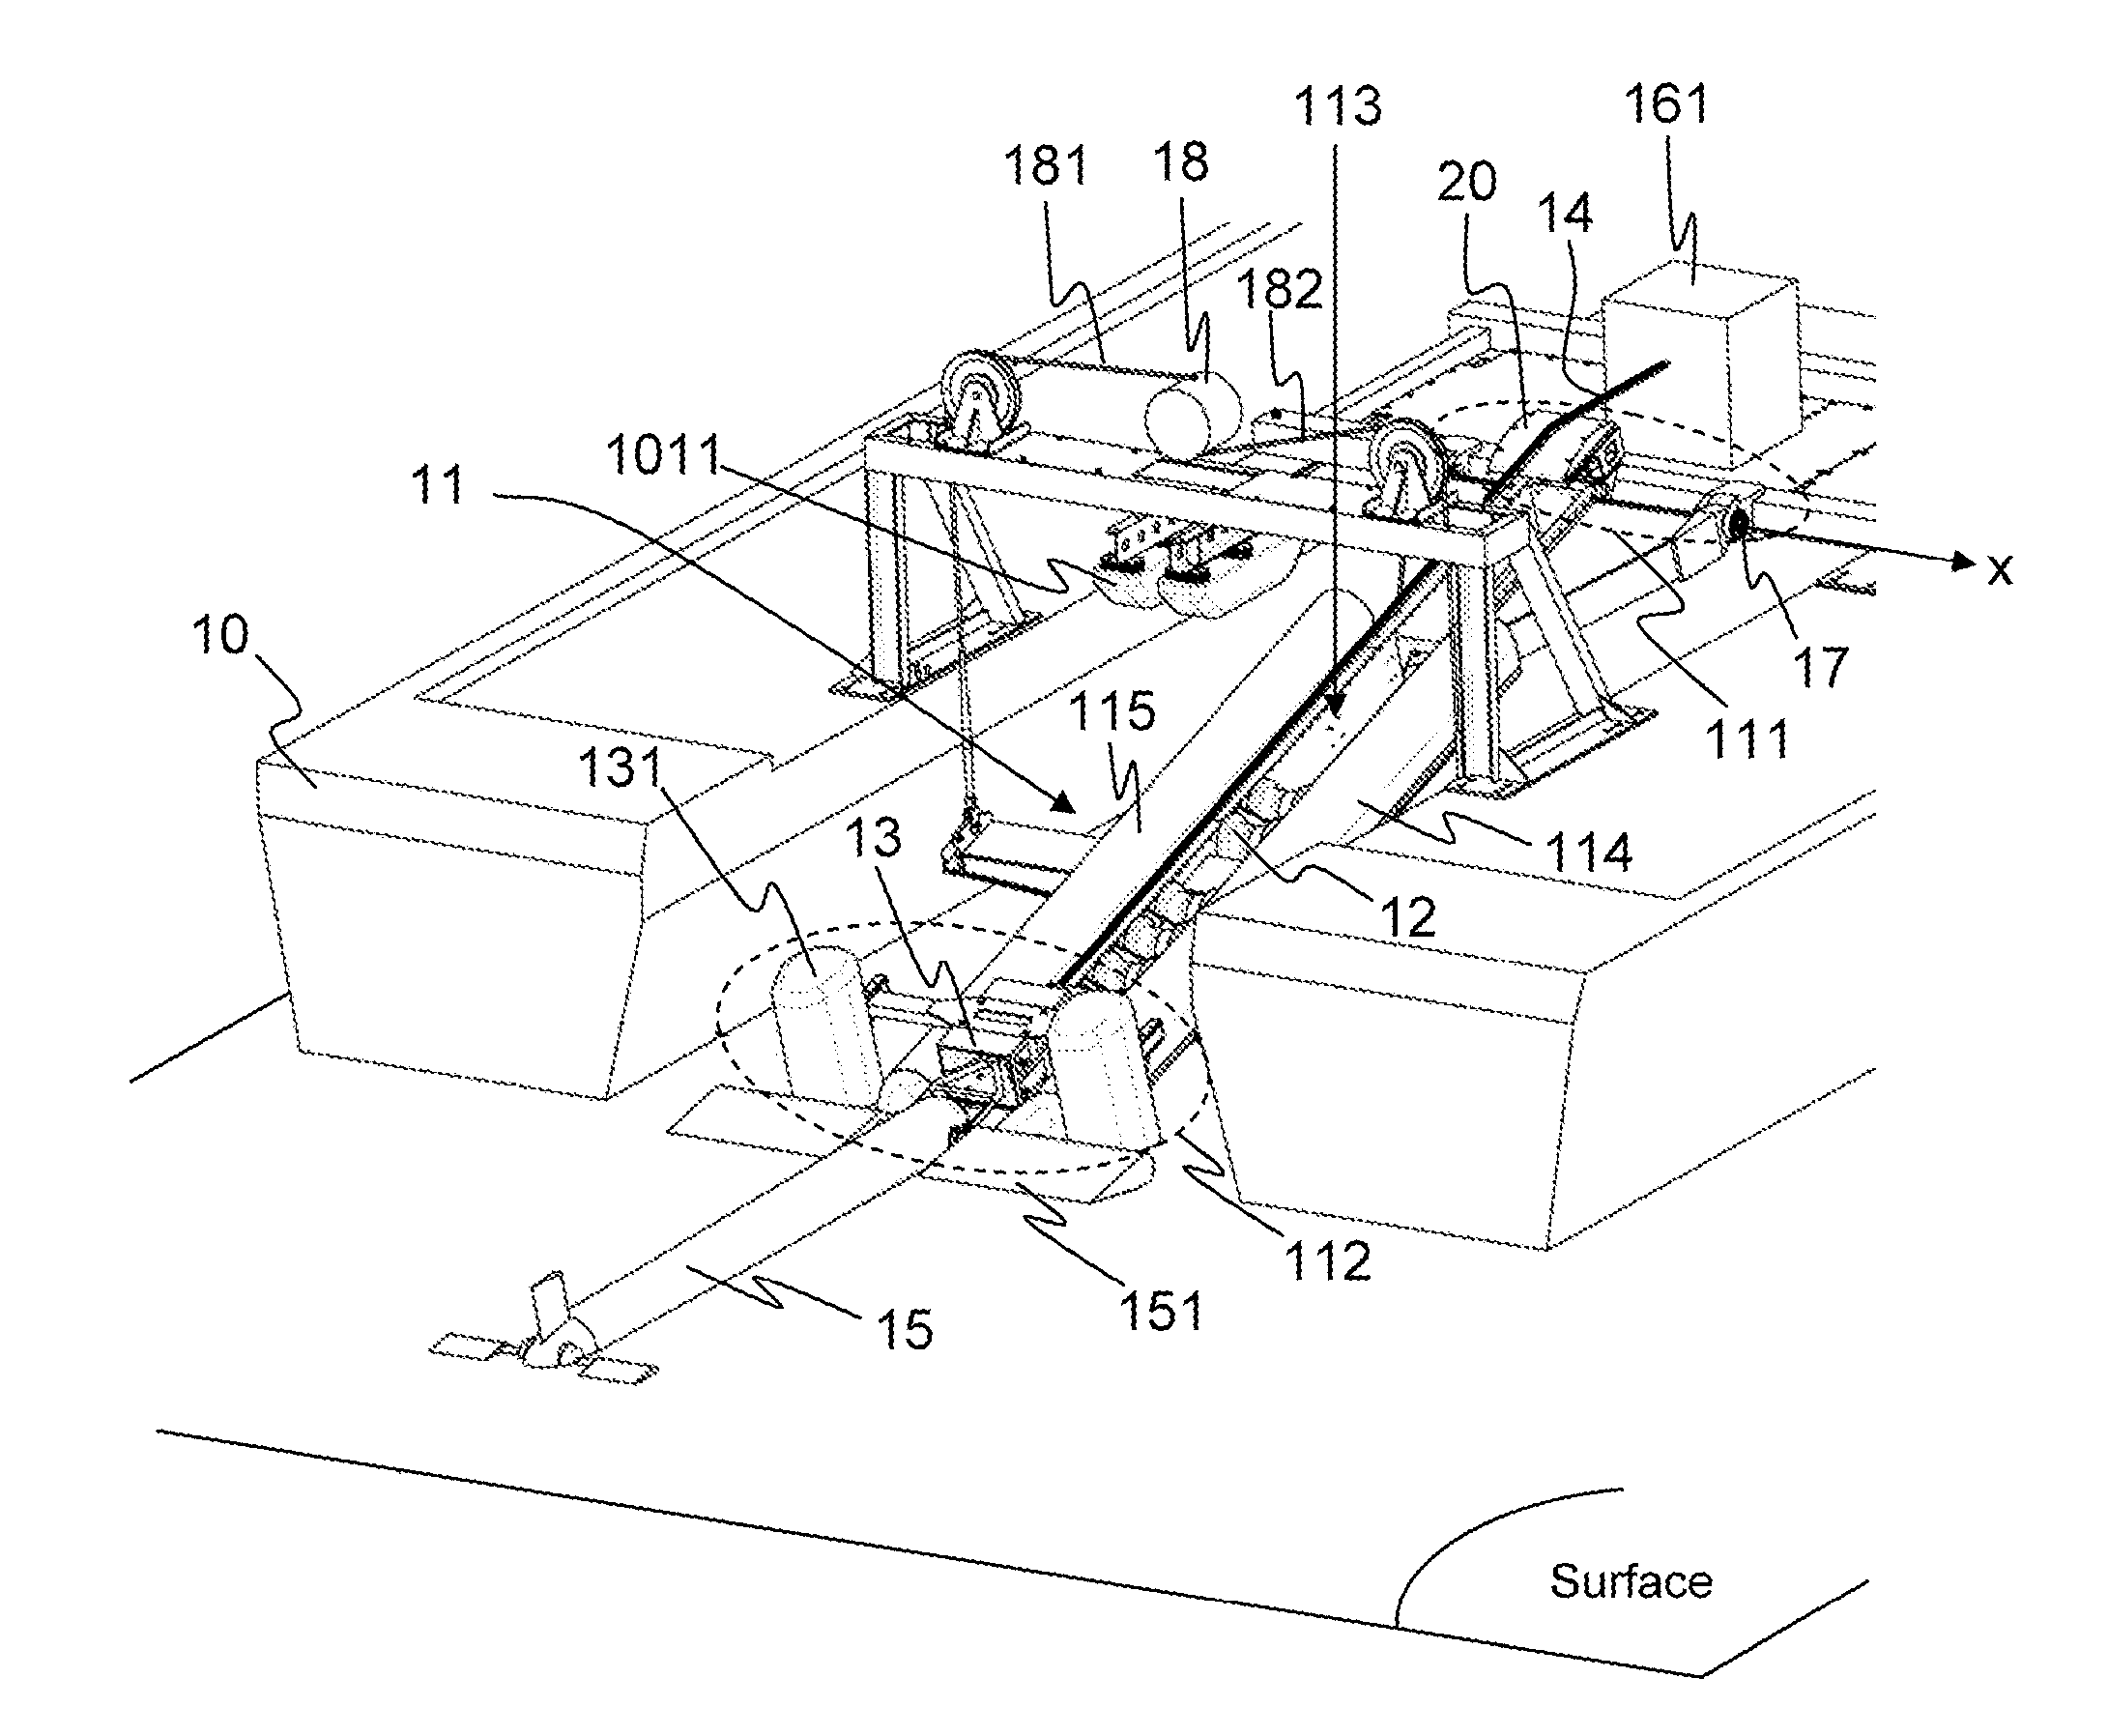 System for launching and recovering underwater vehicles, notably towed underwater vehicles